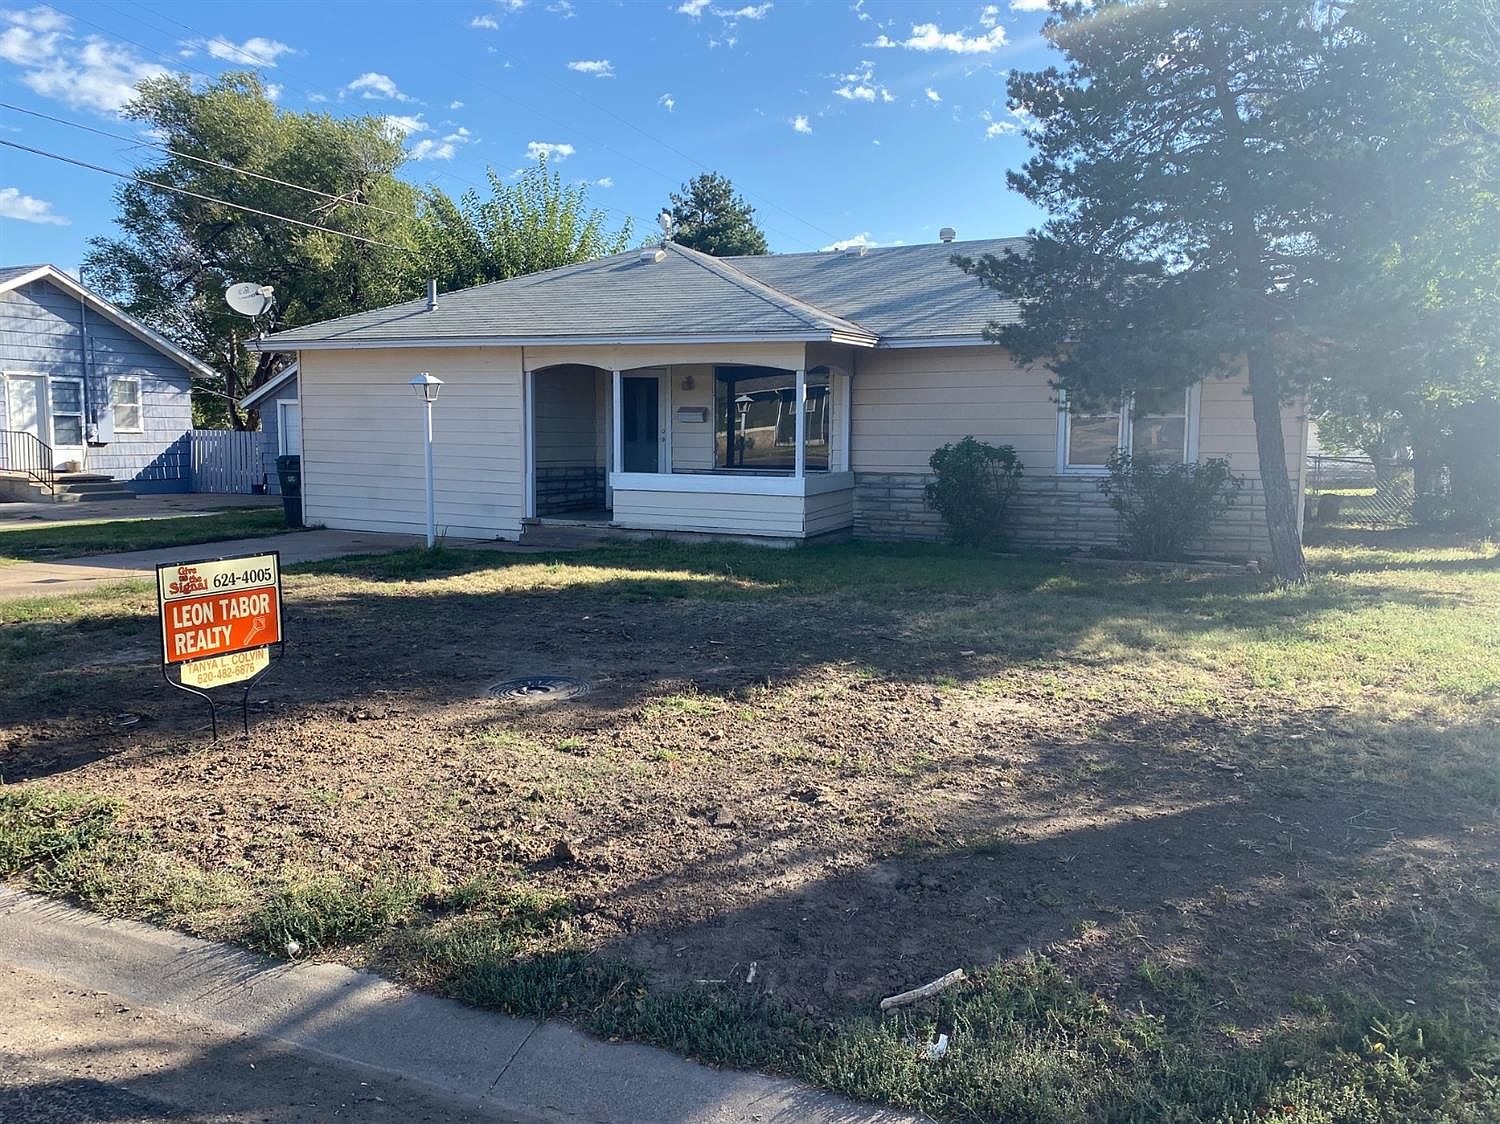 615 S Pershing Ave, Liberal, KS 67901 | Zillow